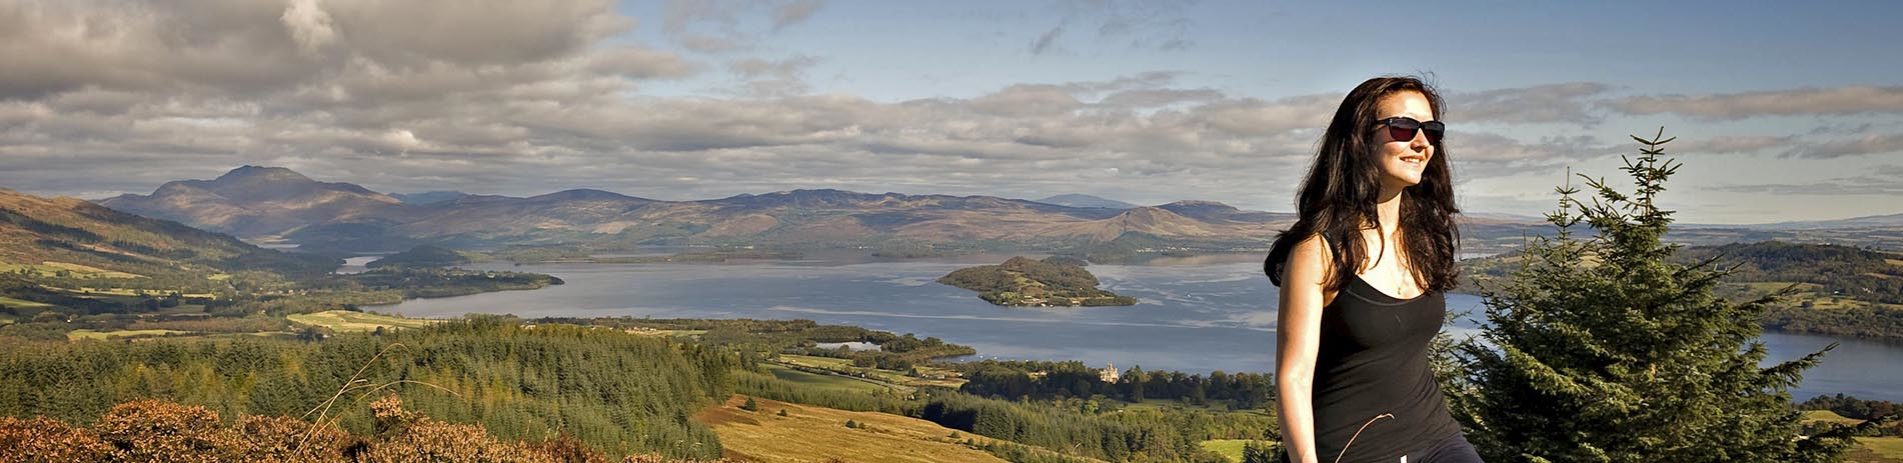 woman-walking-with-view-of-loch-lomond-ben-lomond-and-islands-in-background-and-blue-skies-partly-covered-by-clouds